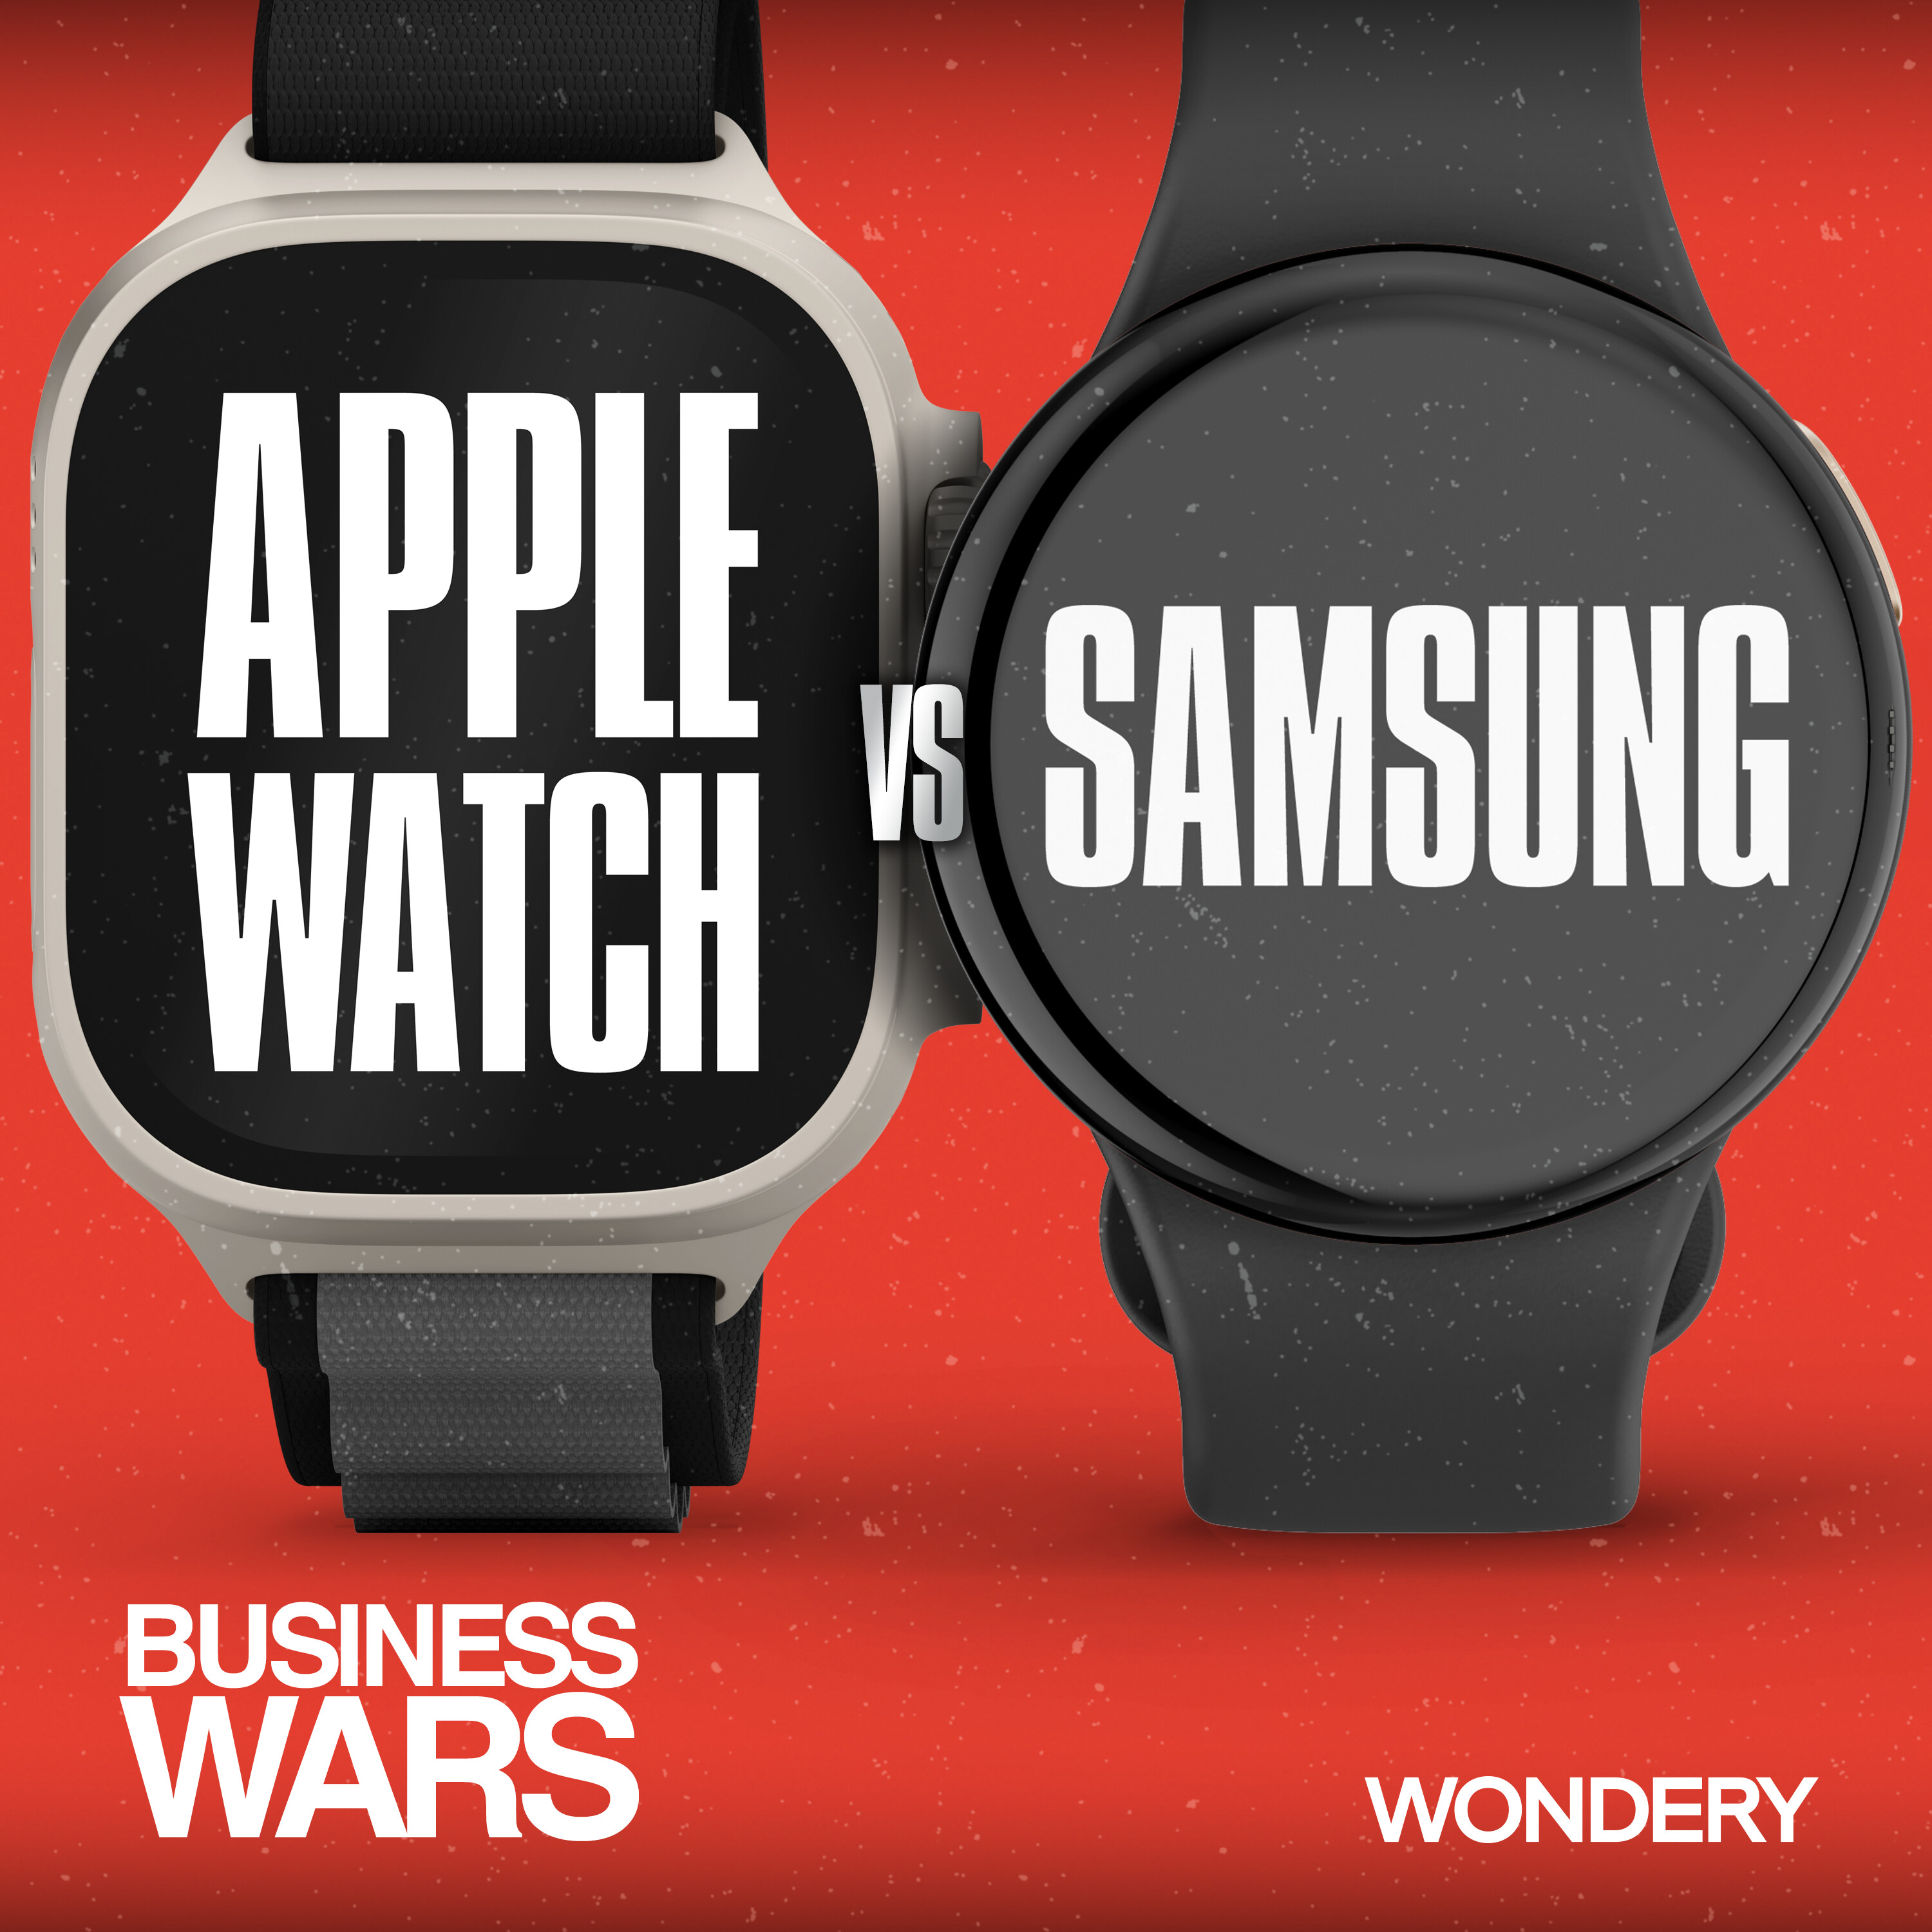 Apple Watch vs Samsung | The Rise of Apple Watch with Steven Levy (Wired) & Cam Wolf (GQ)  | 4